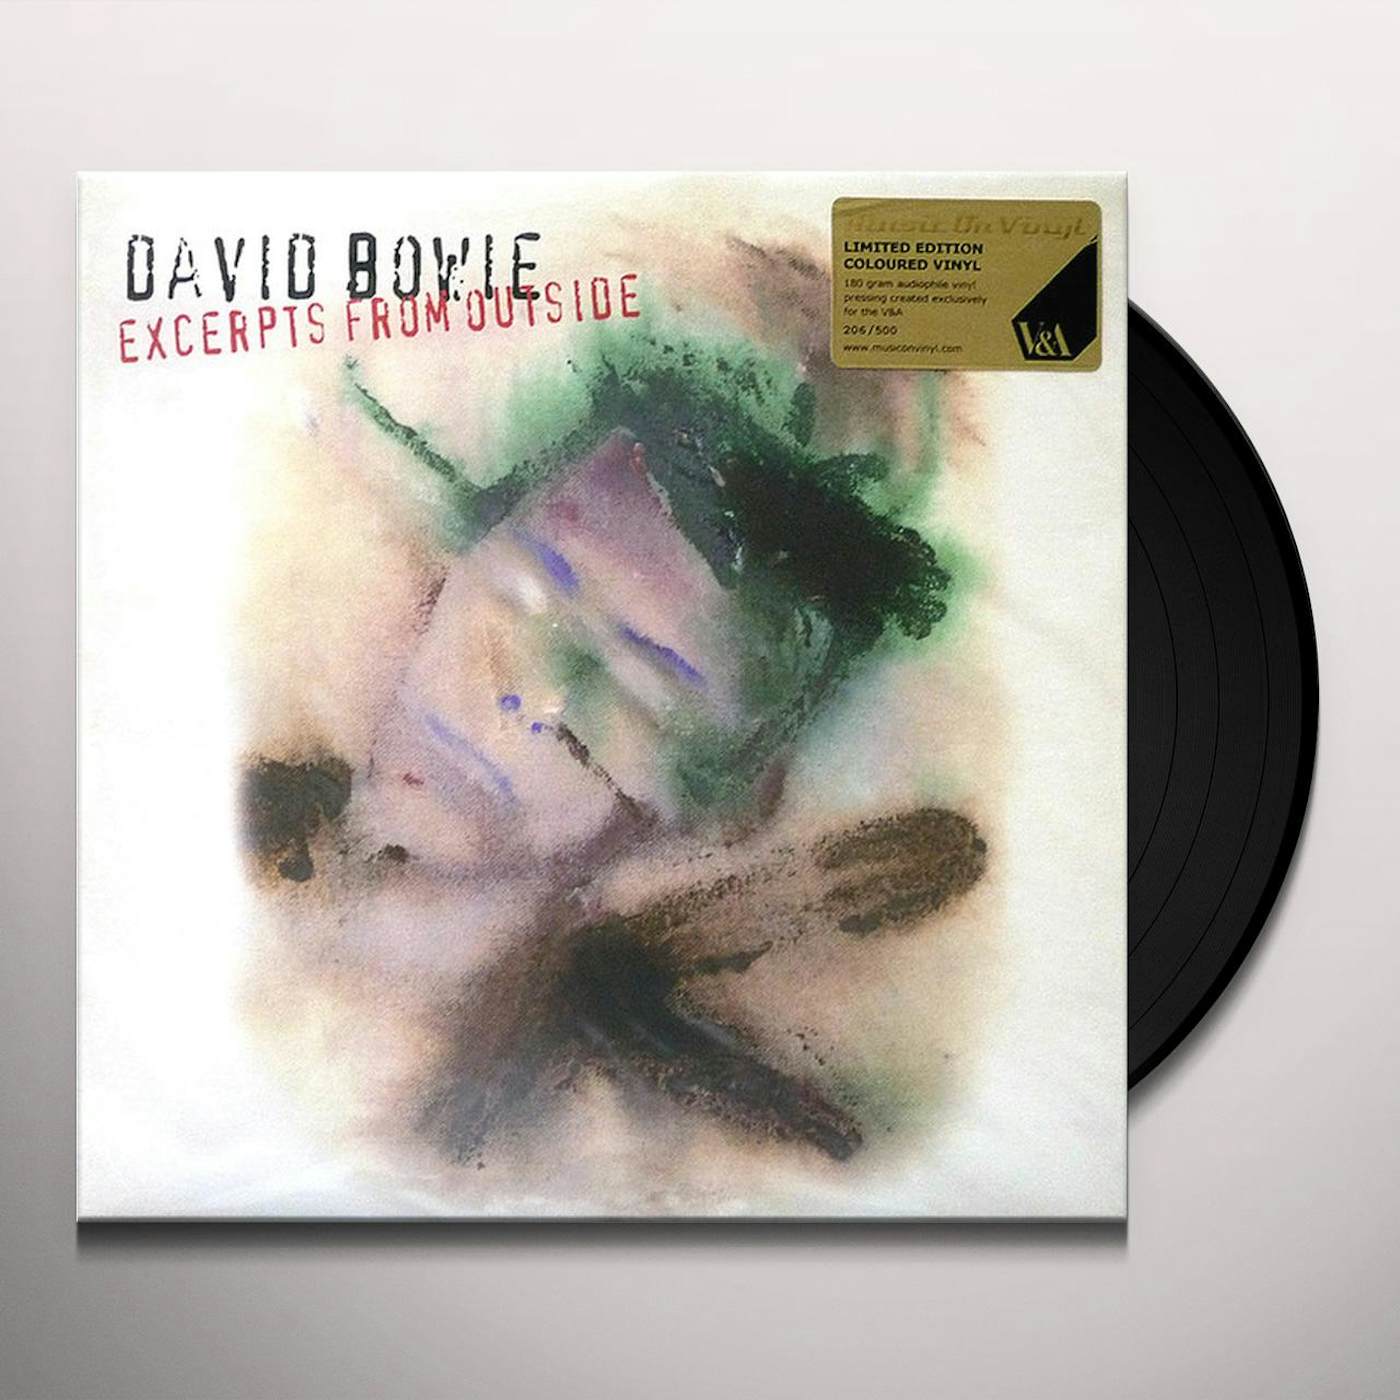 David Bowie EXCERPTS FROM OUTSIDE Vinyl Record